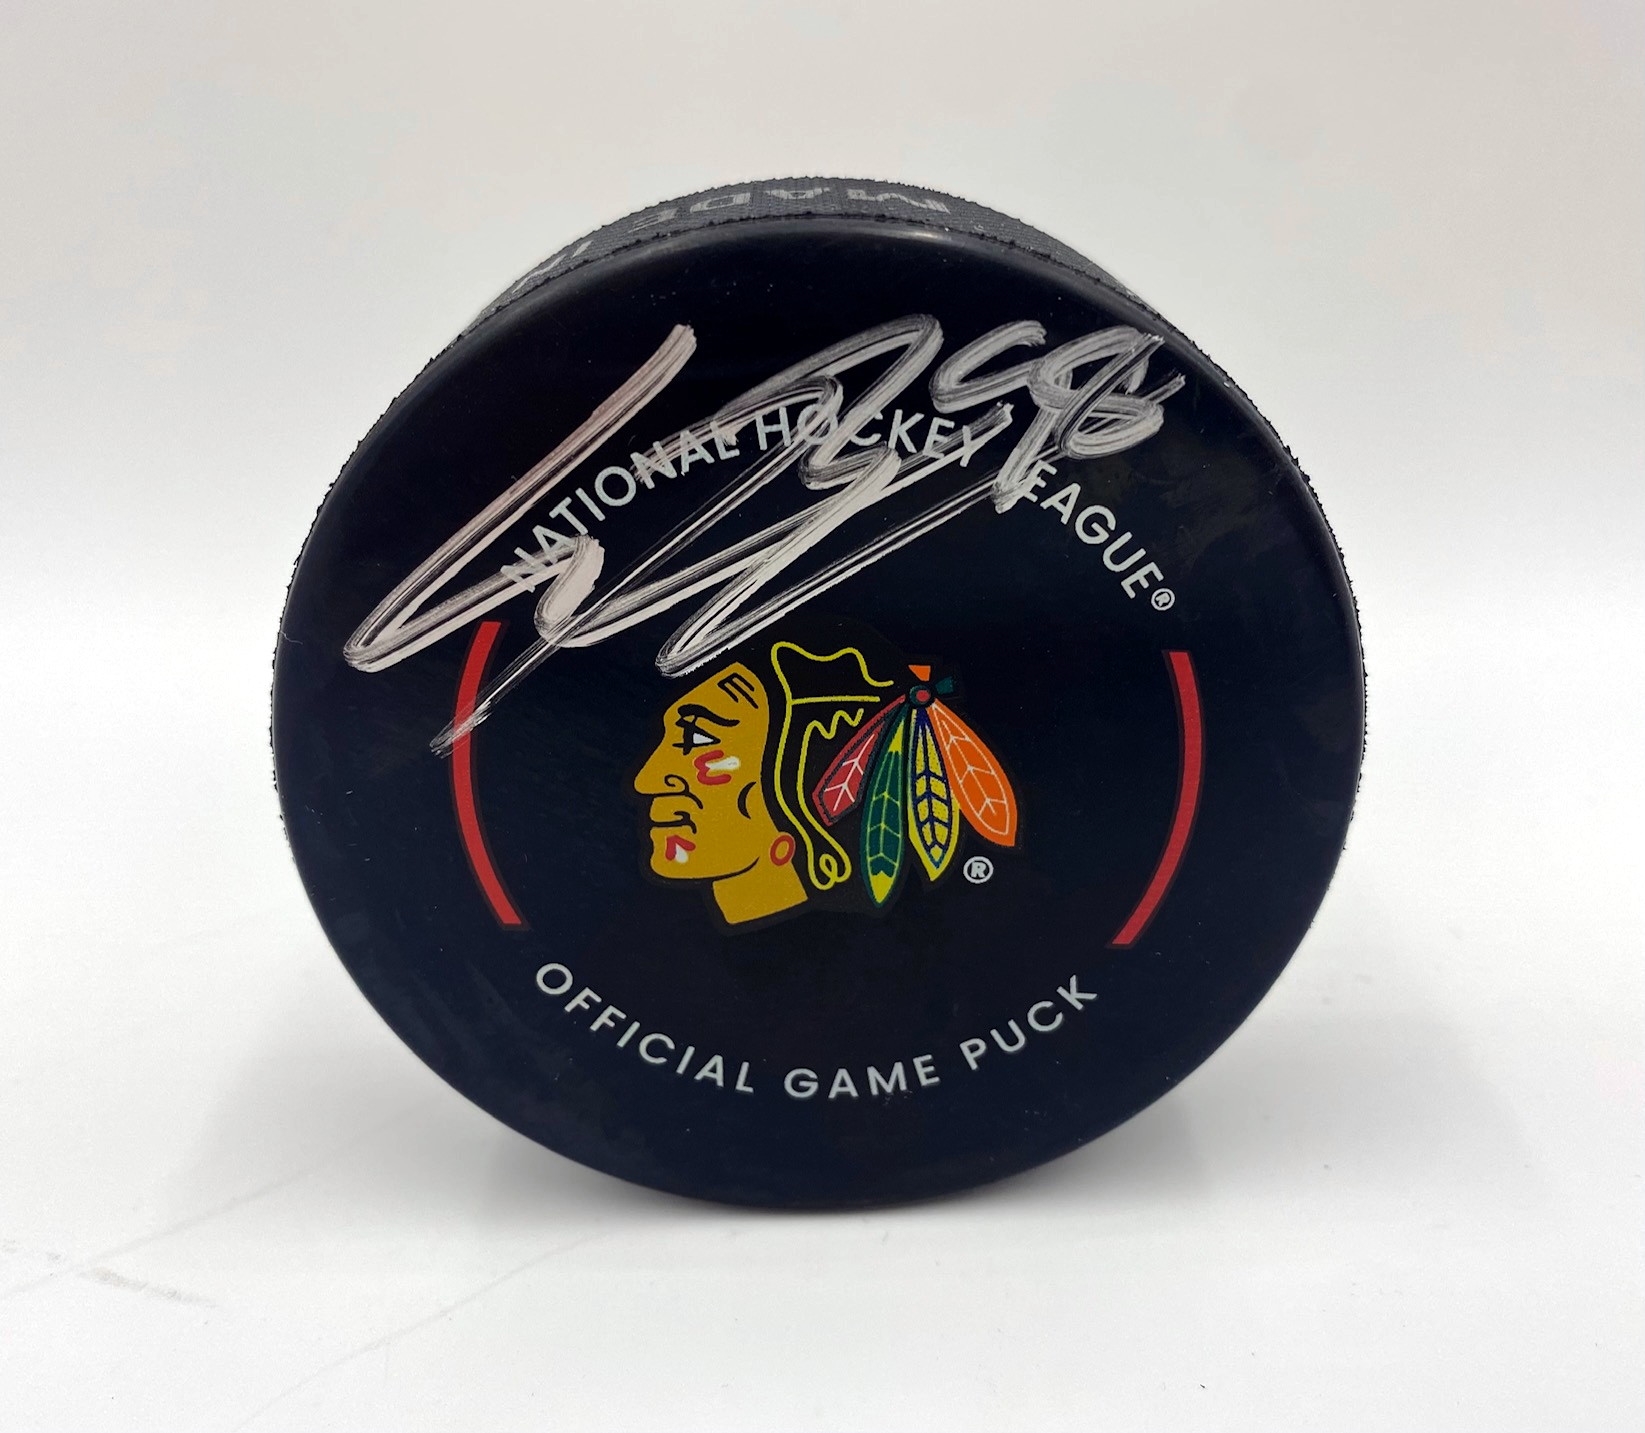 Connor Bedard Signed Chicago Blackhawks Official NHL Game Puck (Streaky)